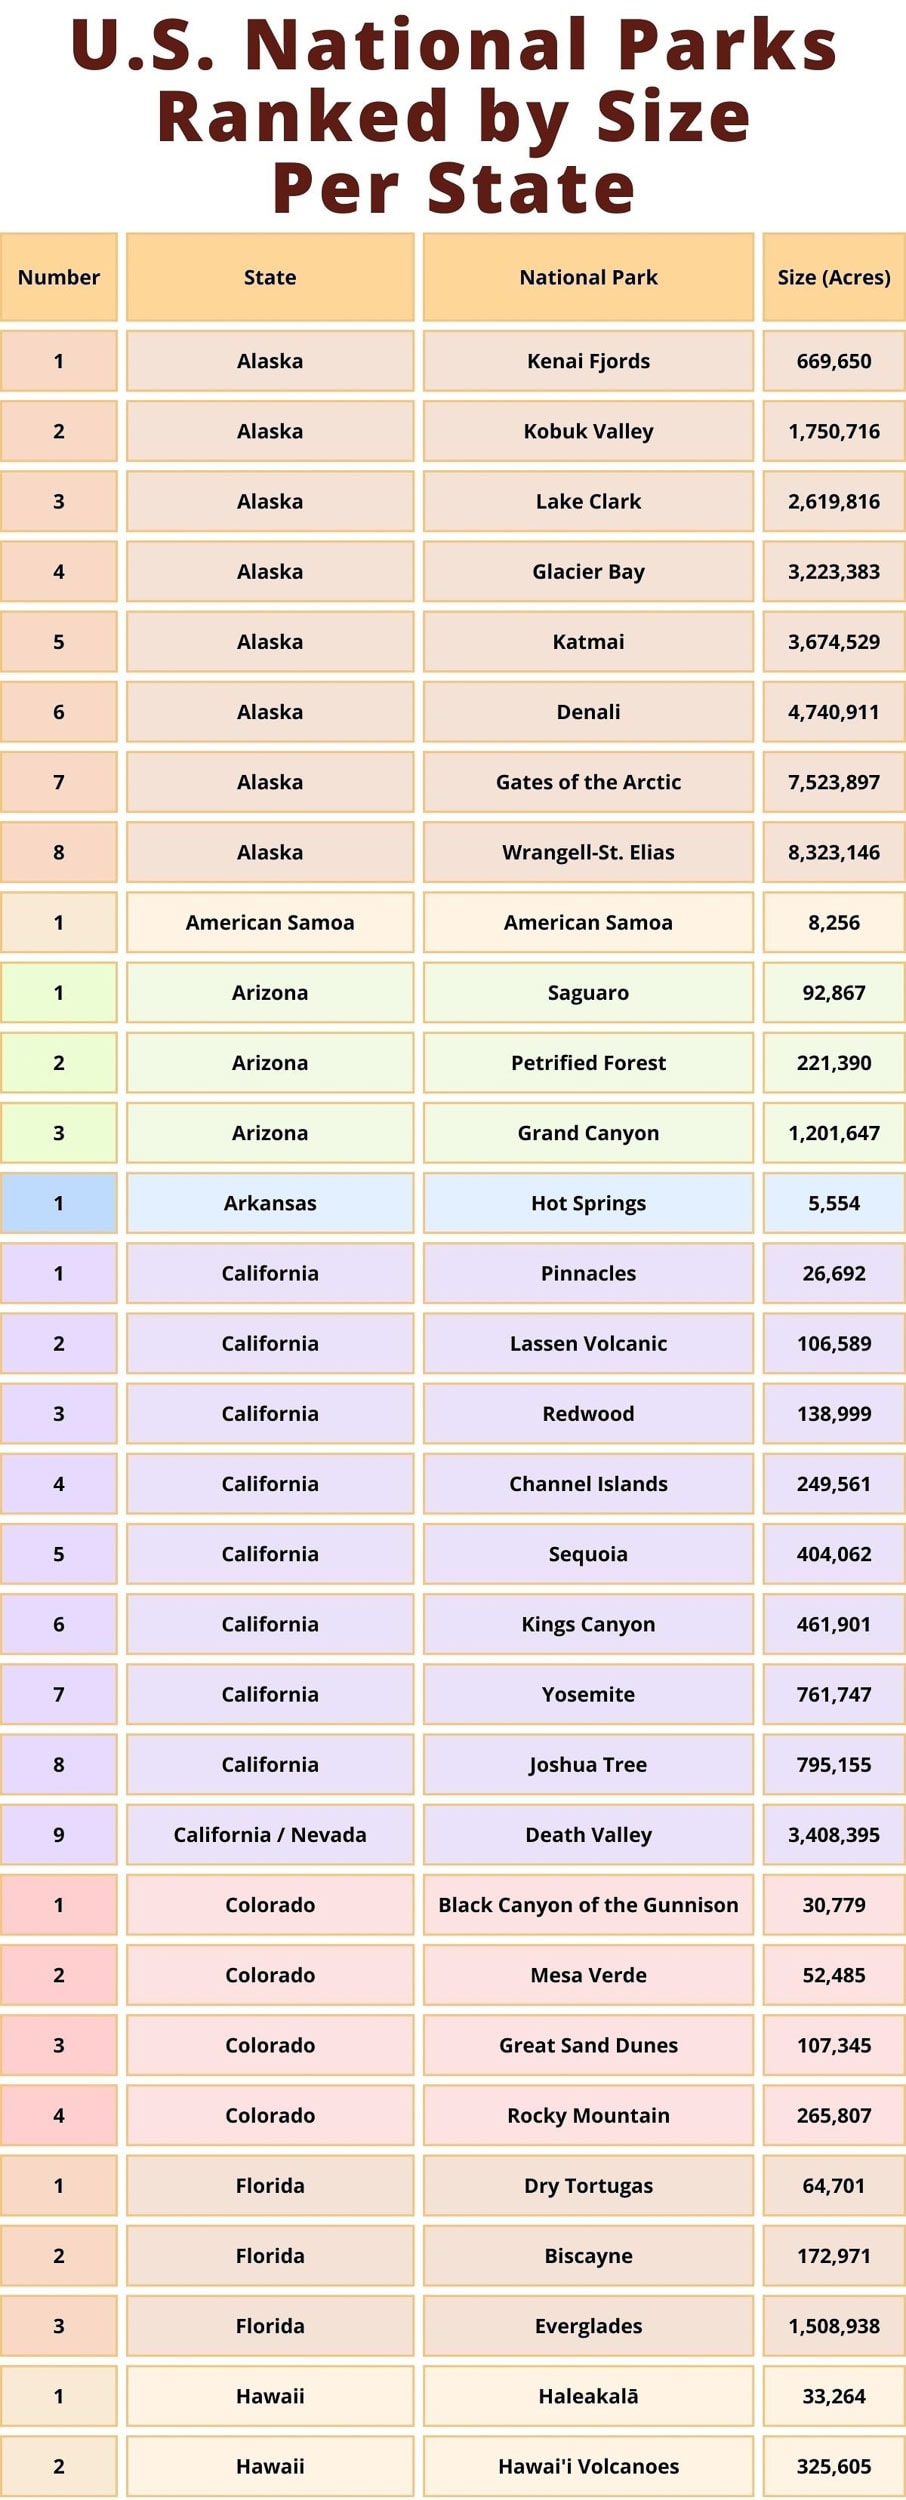 U.S. National Parks Ranked by Size Per State (Alaska through Hawaii)